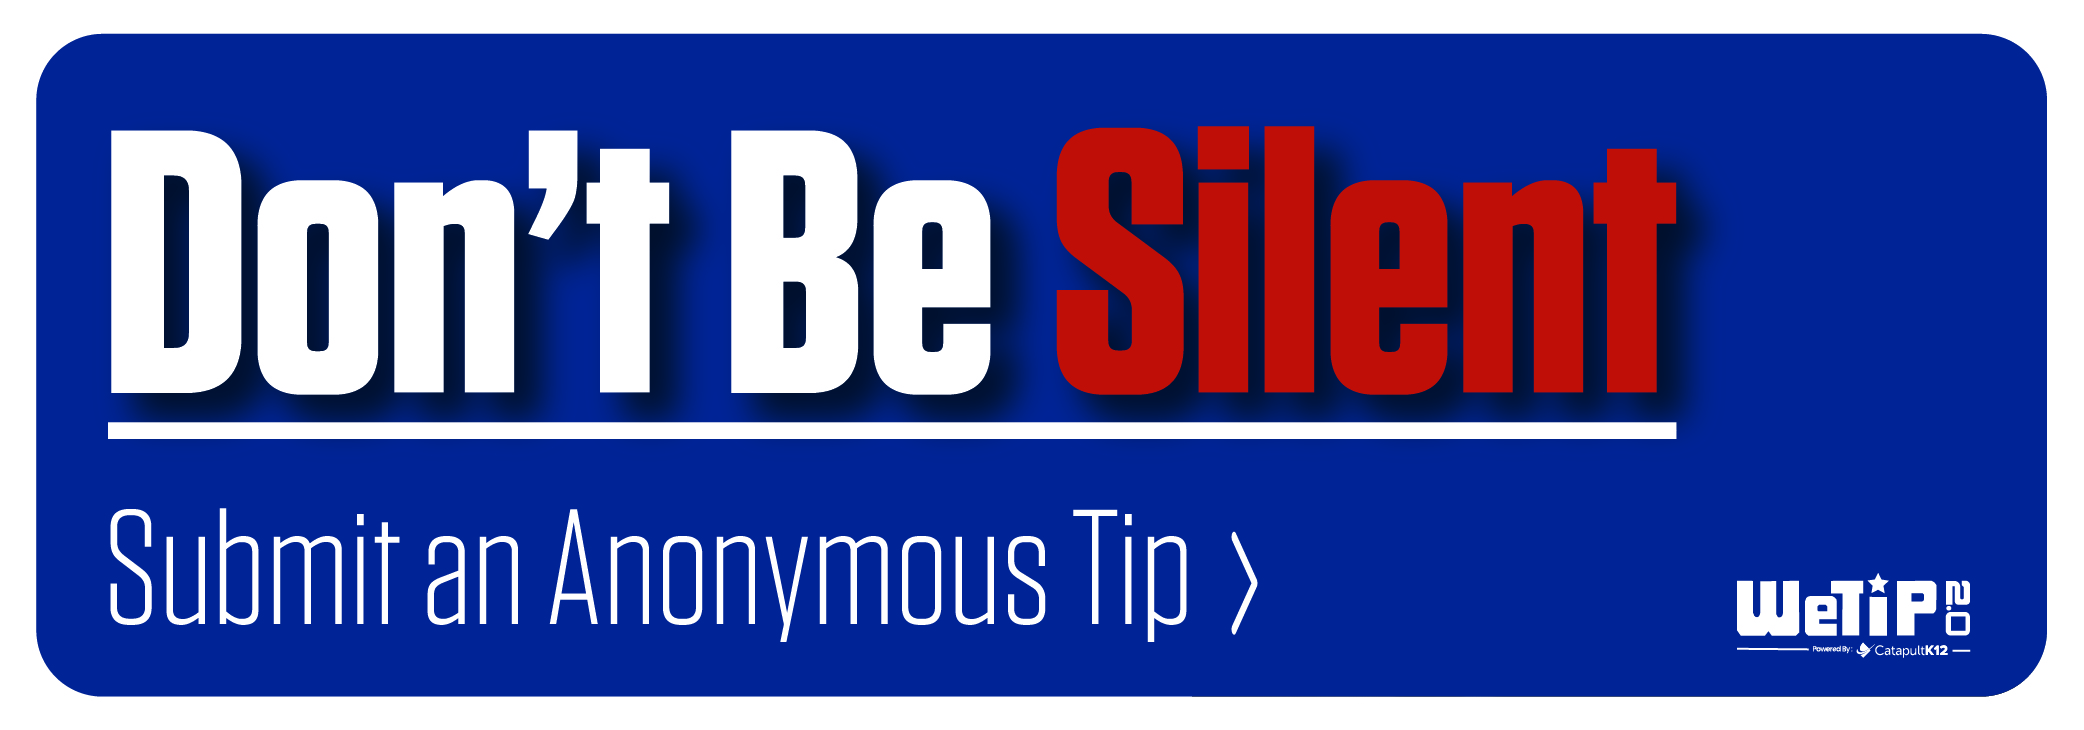 Don't Be Silent - Submit an Anonymous Tip